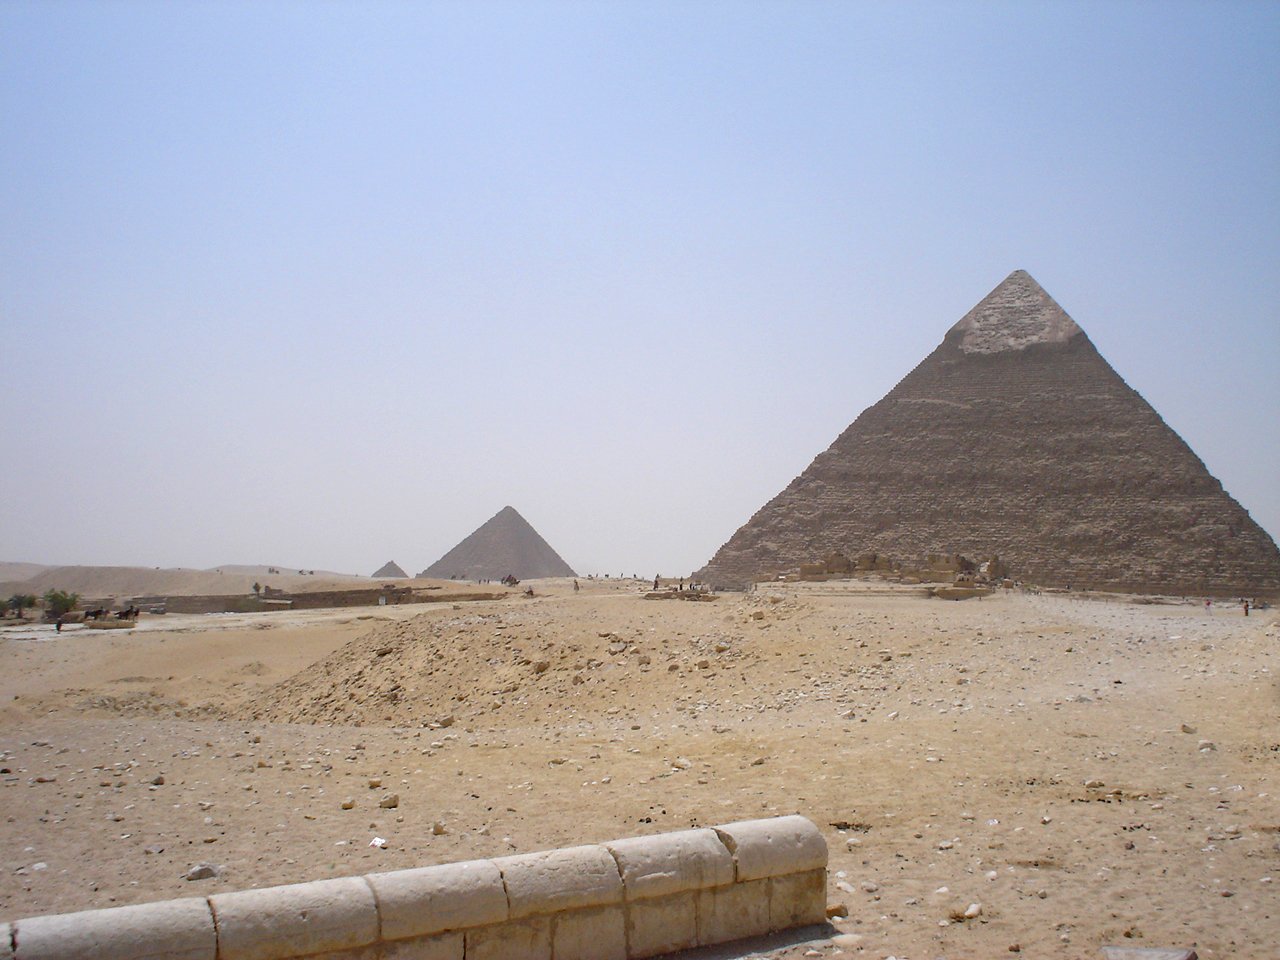 the egyptian pyramids and their minalis are seen